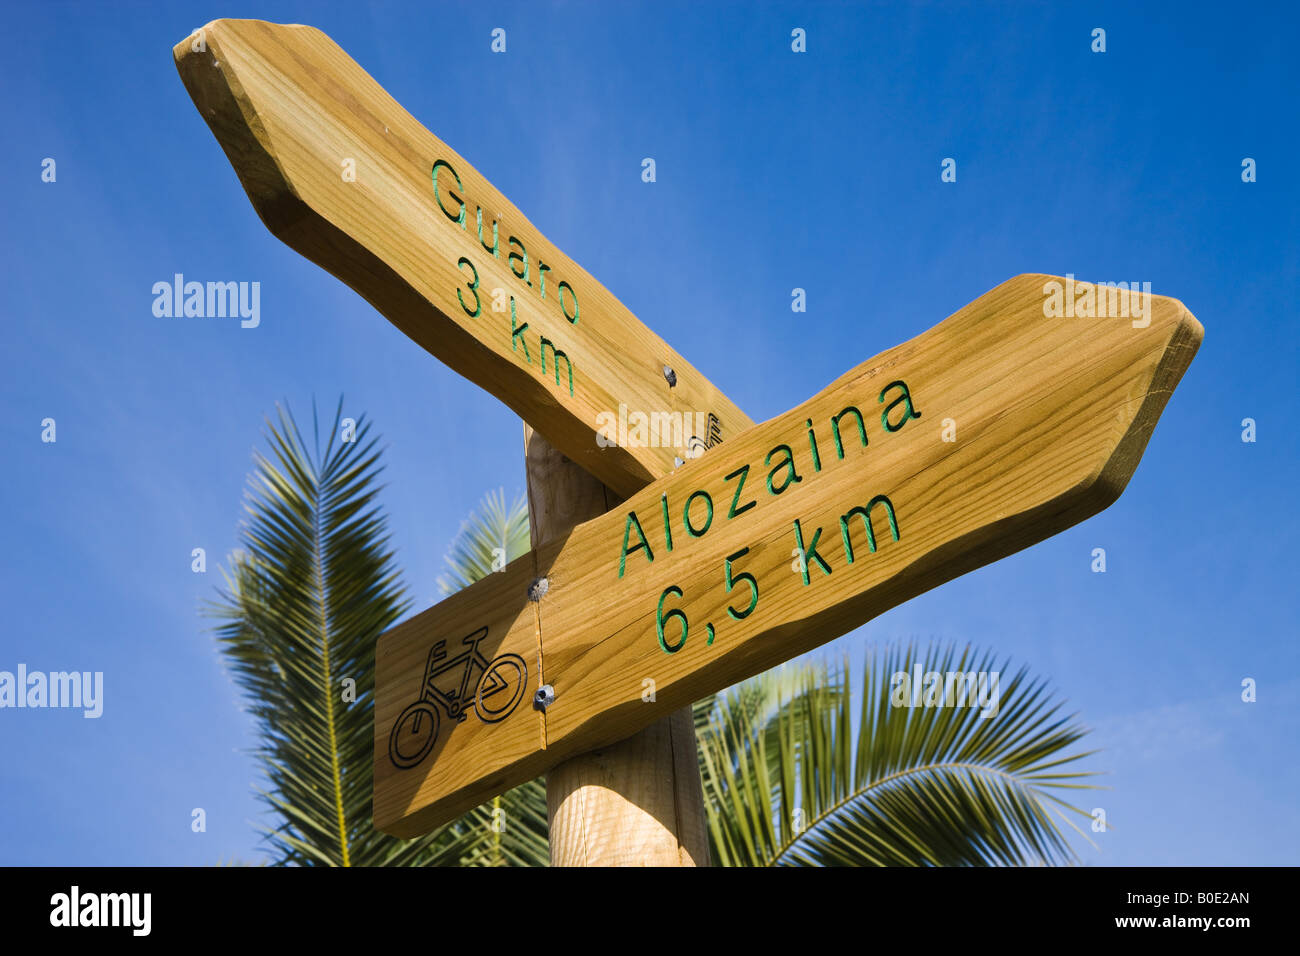 Sign pointing to bicycle tracks to Guaro and Alozaina in Parque Natural Sierra de las Nieves Malaga Province Spain Stock Photo